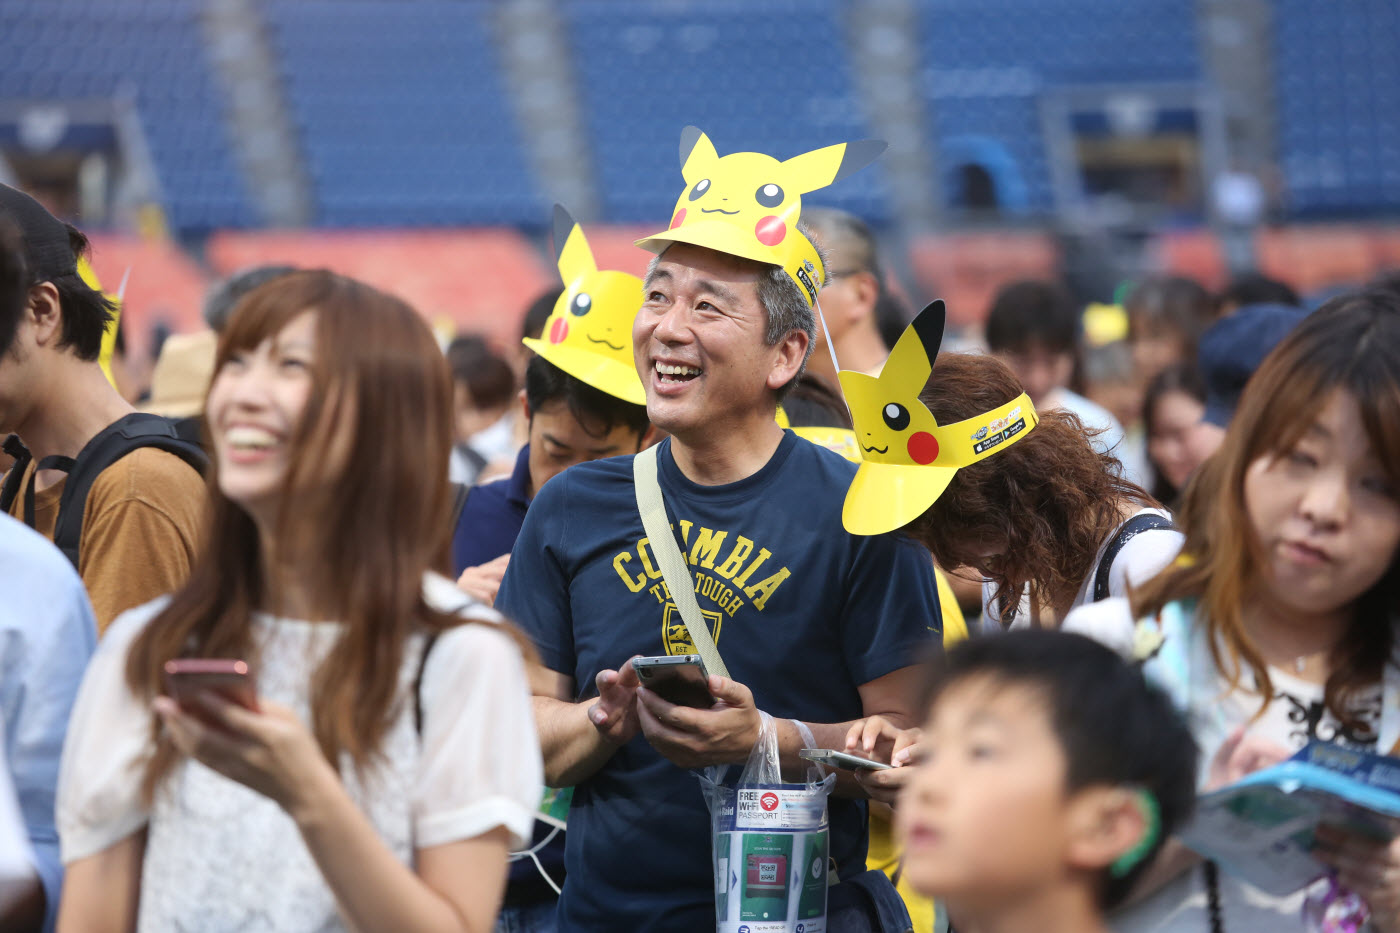 Pikachu Outbreak, a 'Pokemon GO' Event in Japan, Attracted 2 Million People Over 7 Days